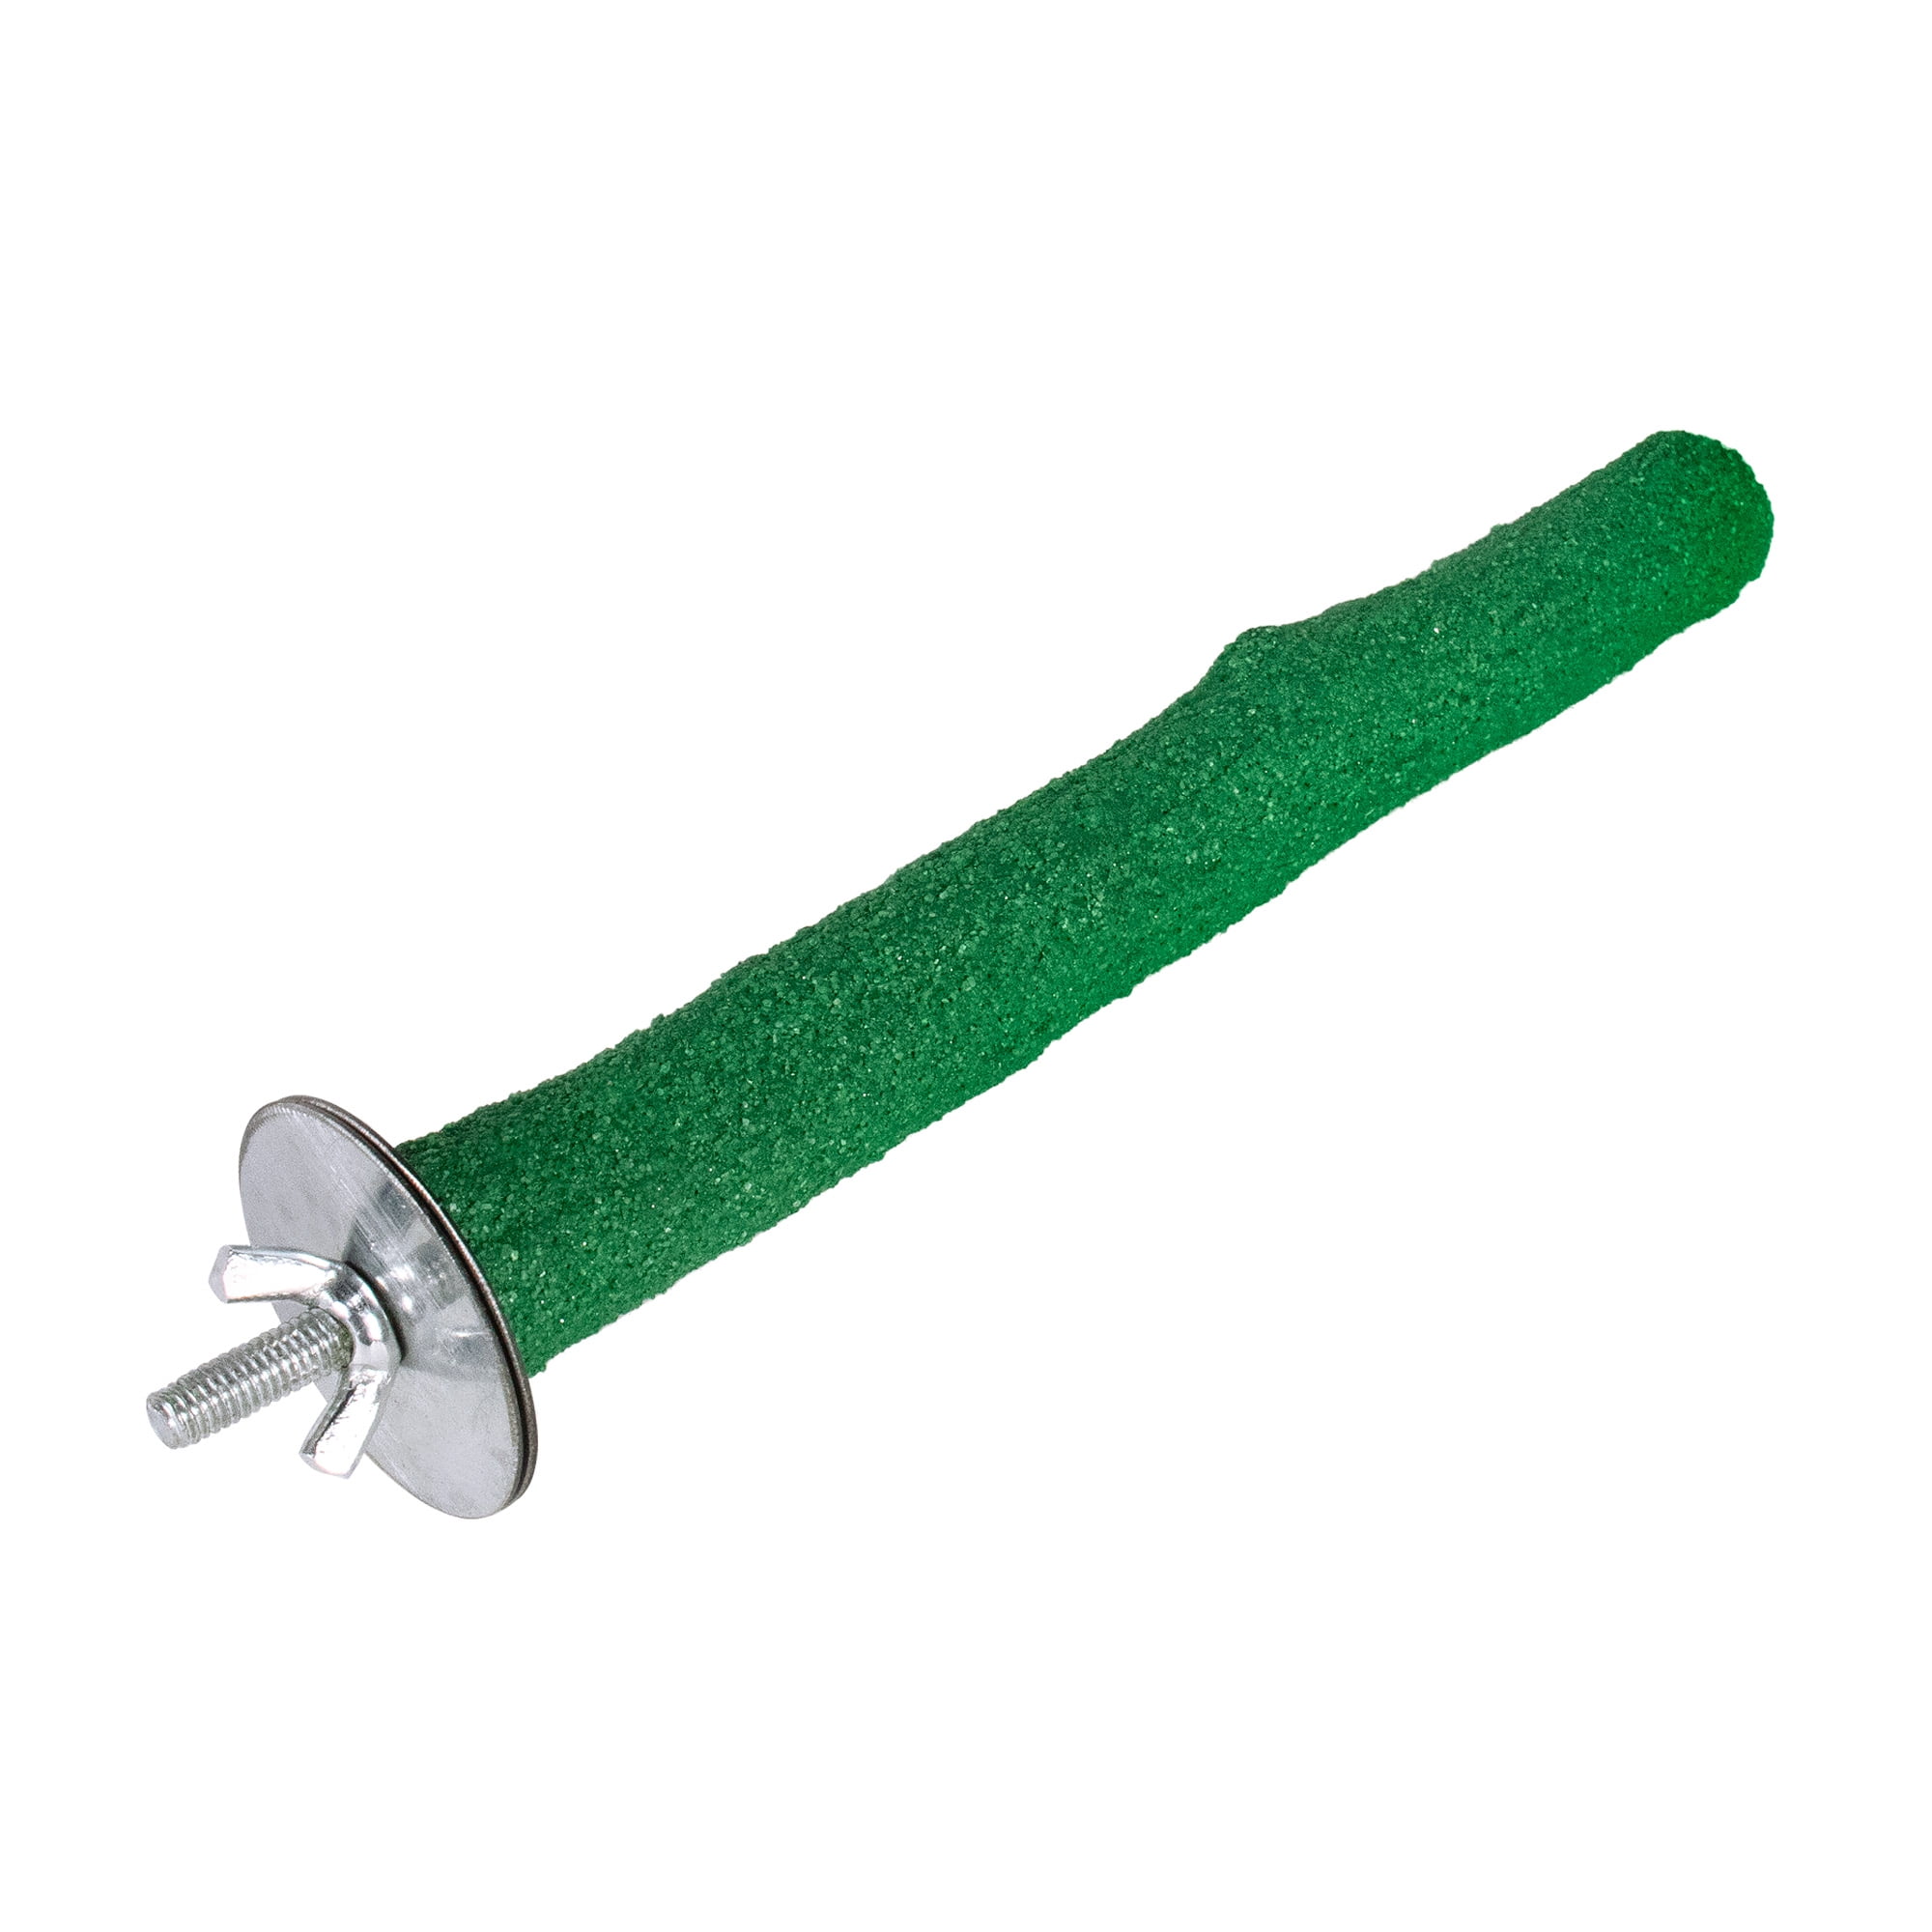 Pet Champion 8 Inch Sand Coated Wood Perch for Small Birds, Green